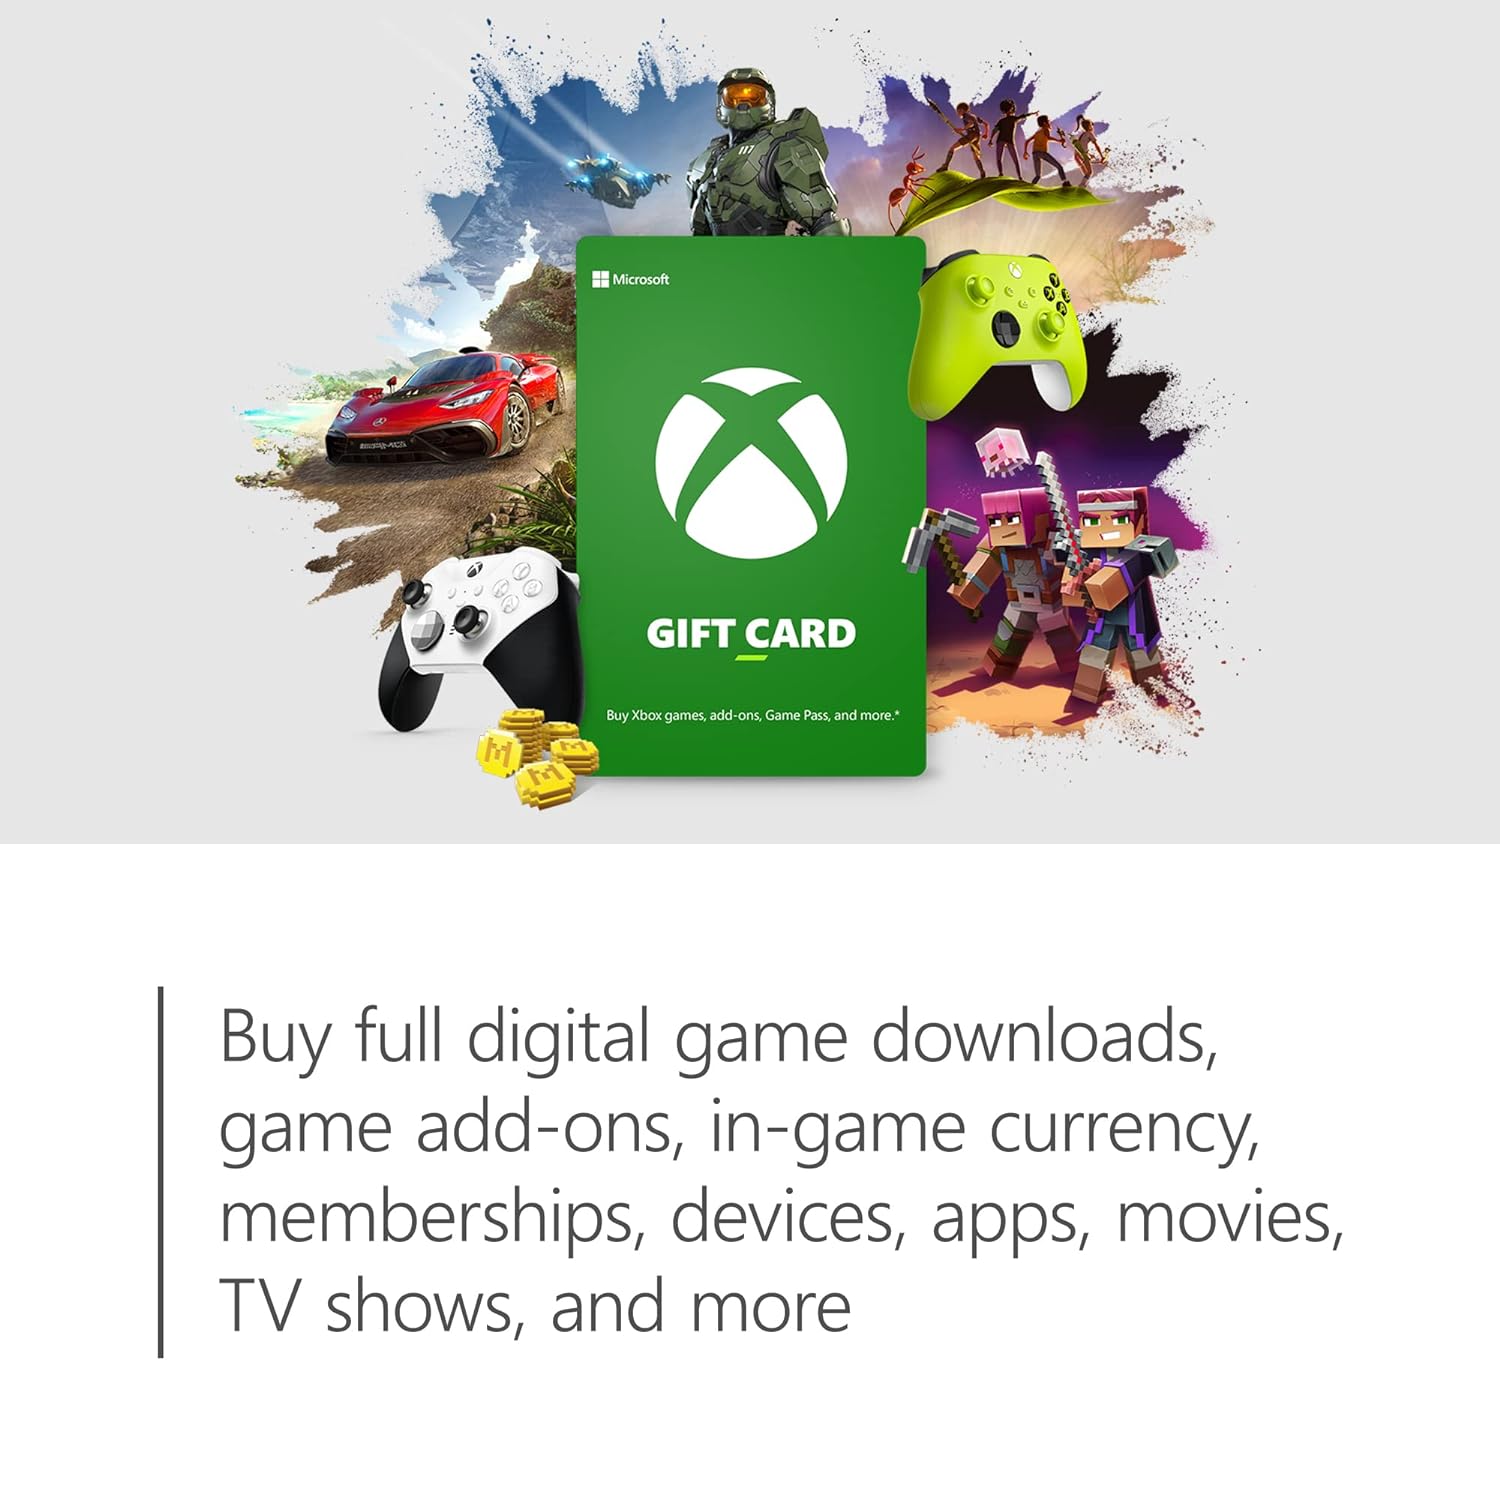 $25 Xbox Digital Gift Card | Buy full digital game downloads, game add-ons, in-game currrency, memberships, devices, apps, movies, TV shows, and more.